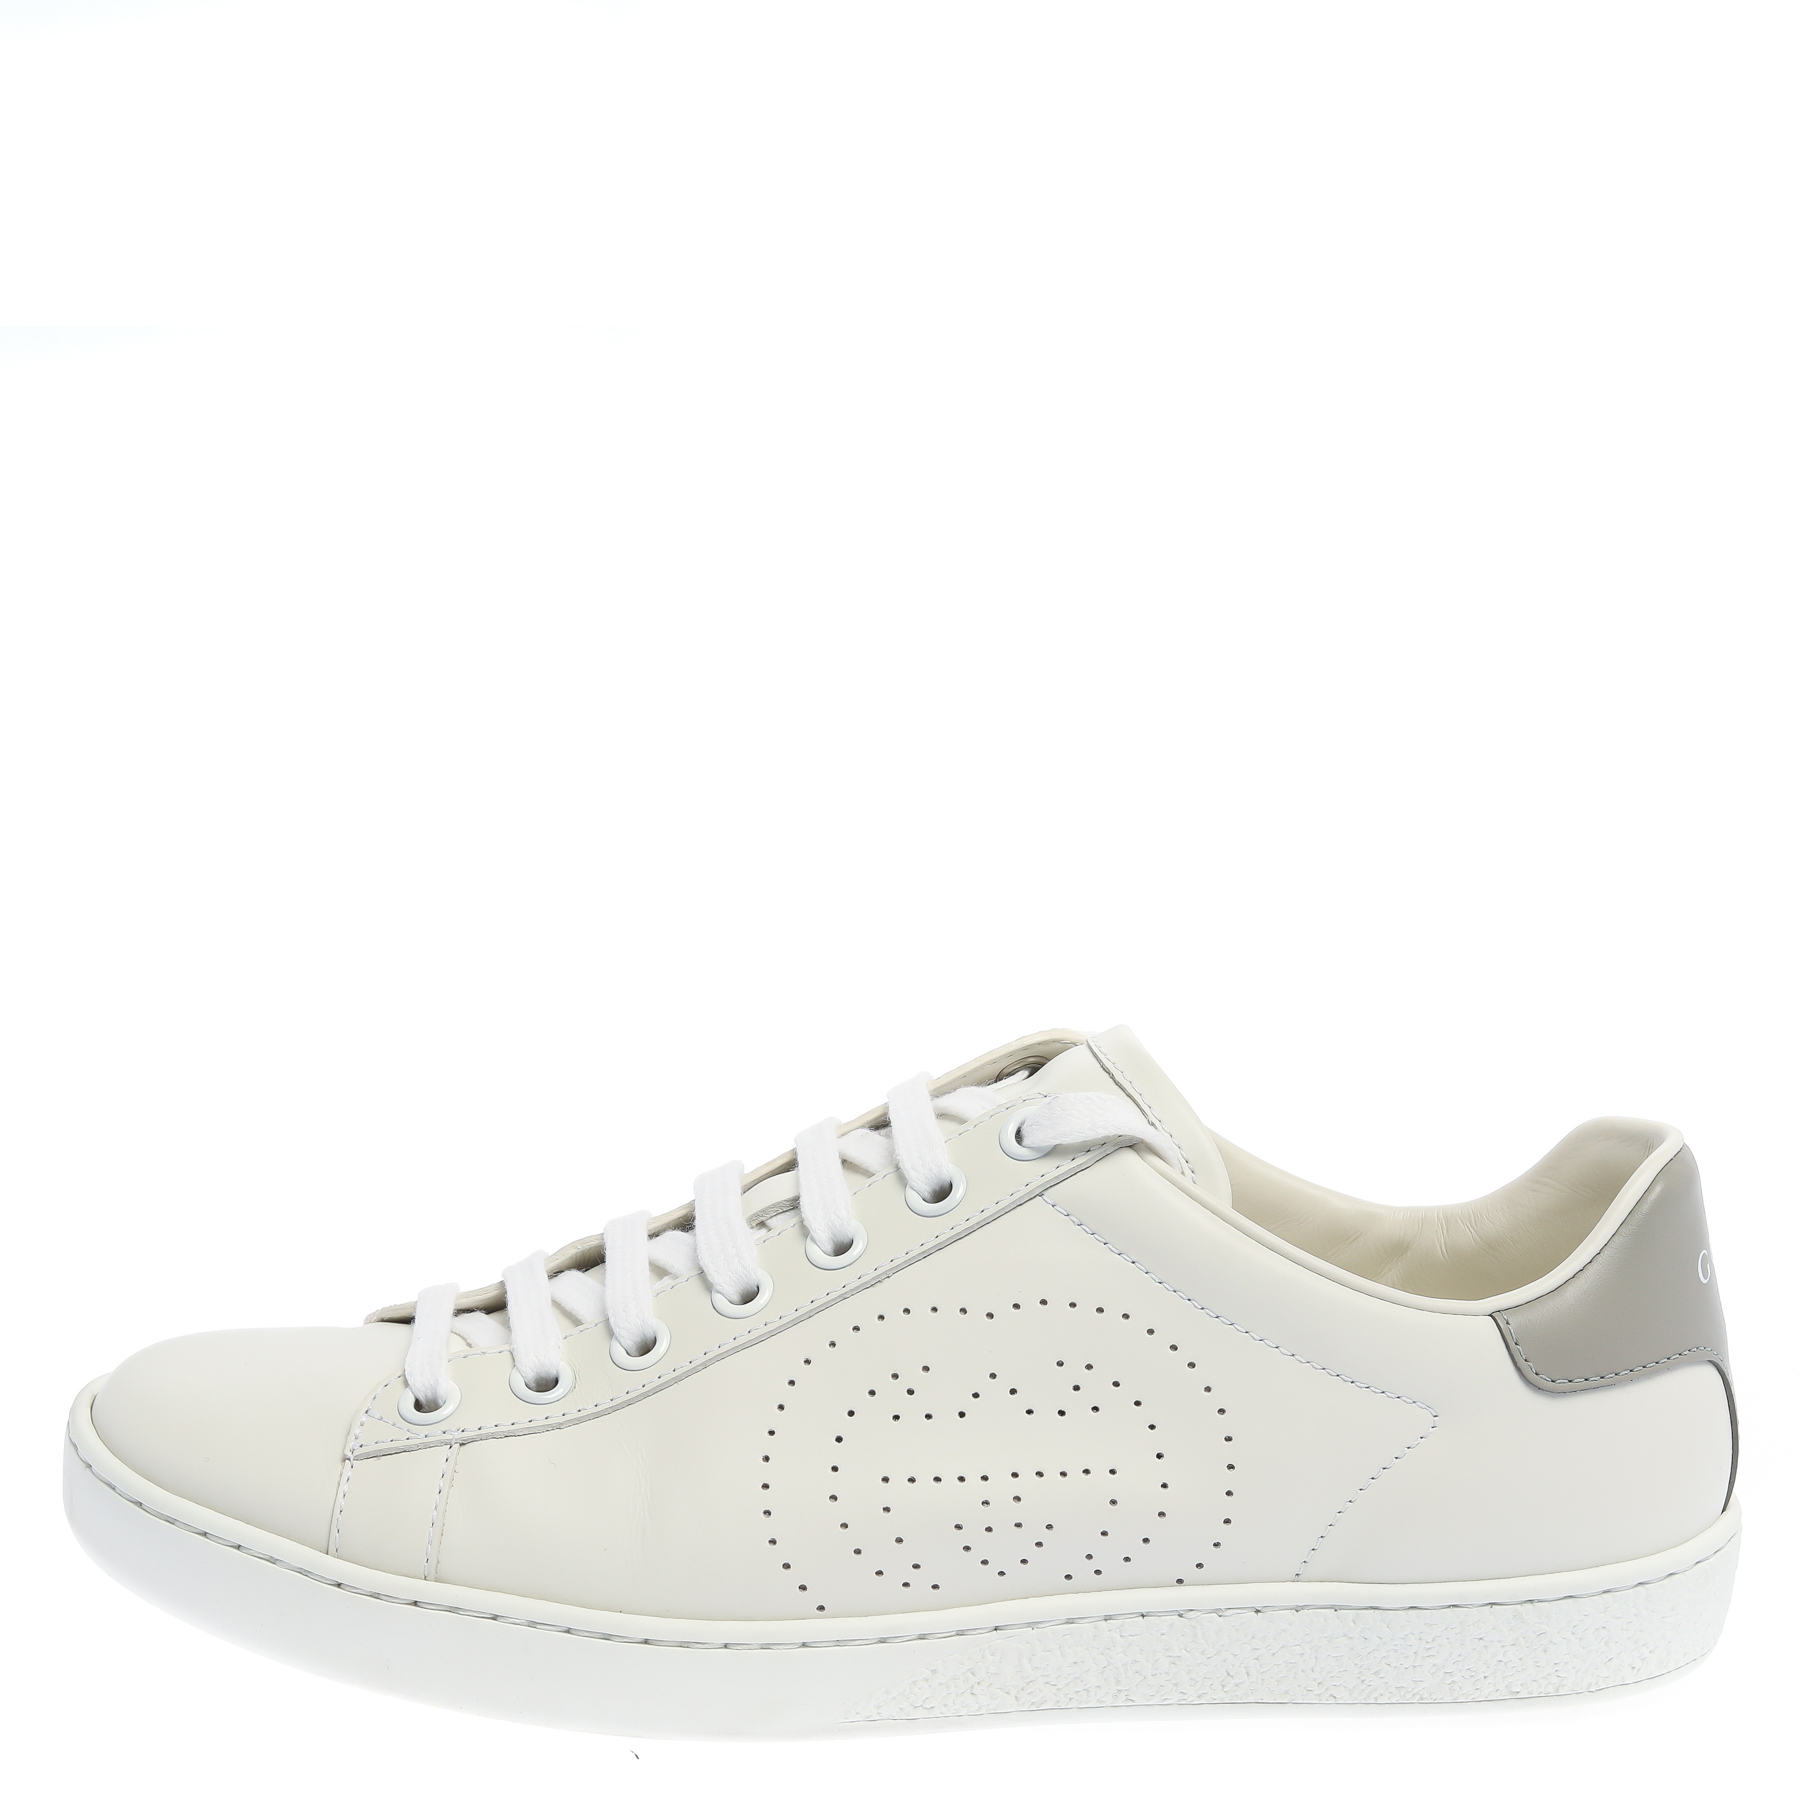 

Gucci White/Grey Perforated Interlocking G Leather Ace Sneakers Size